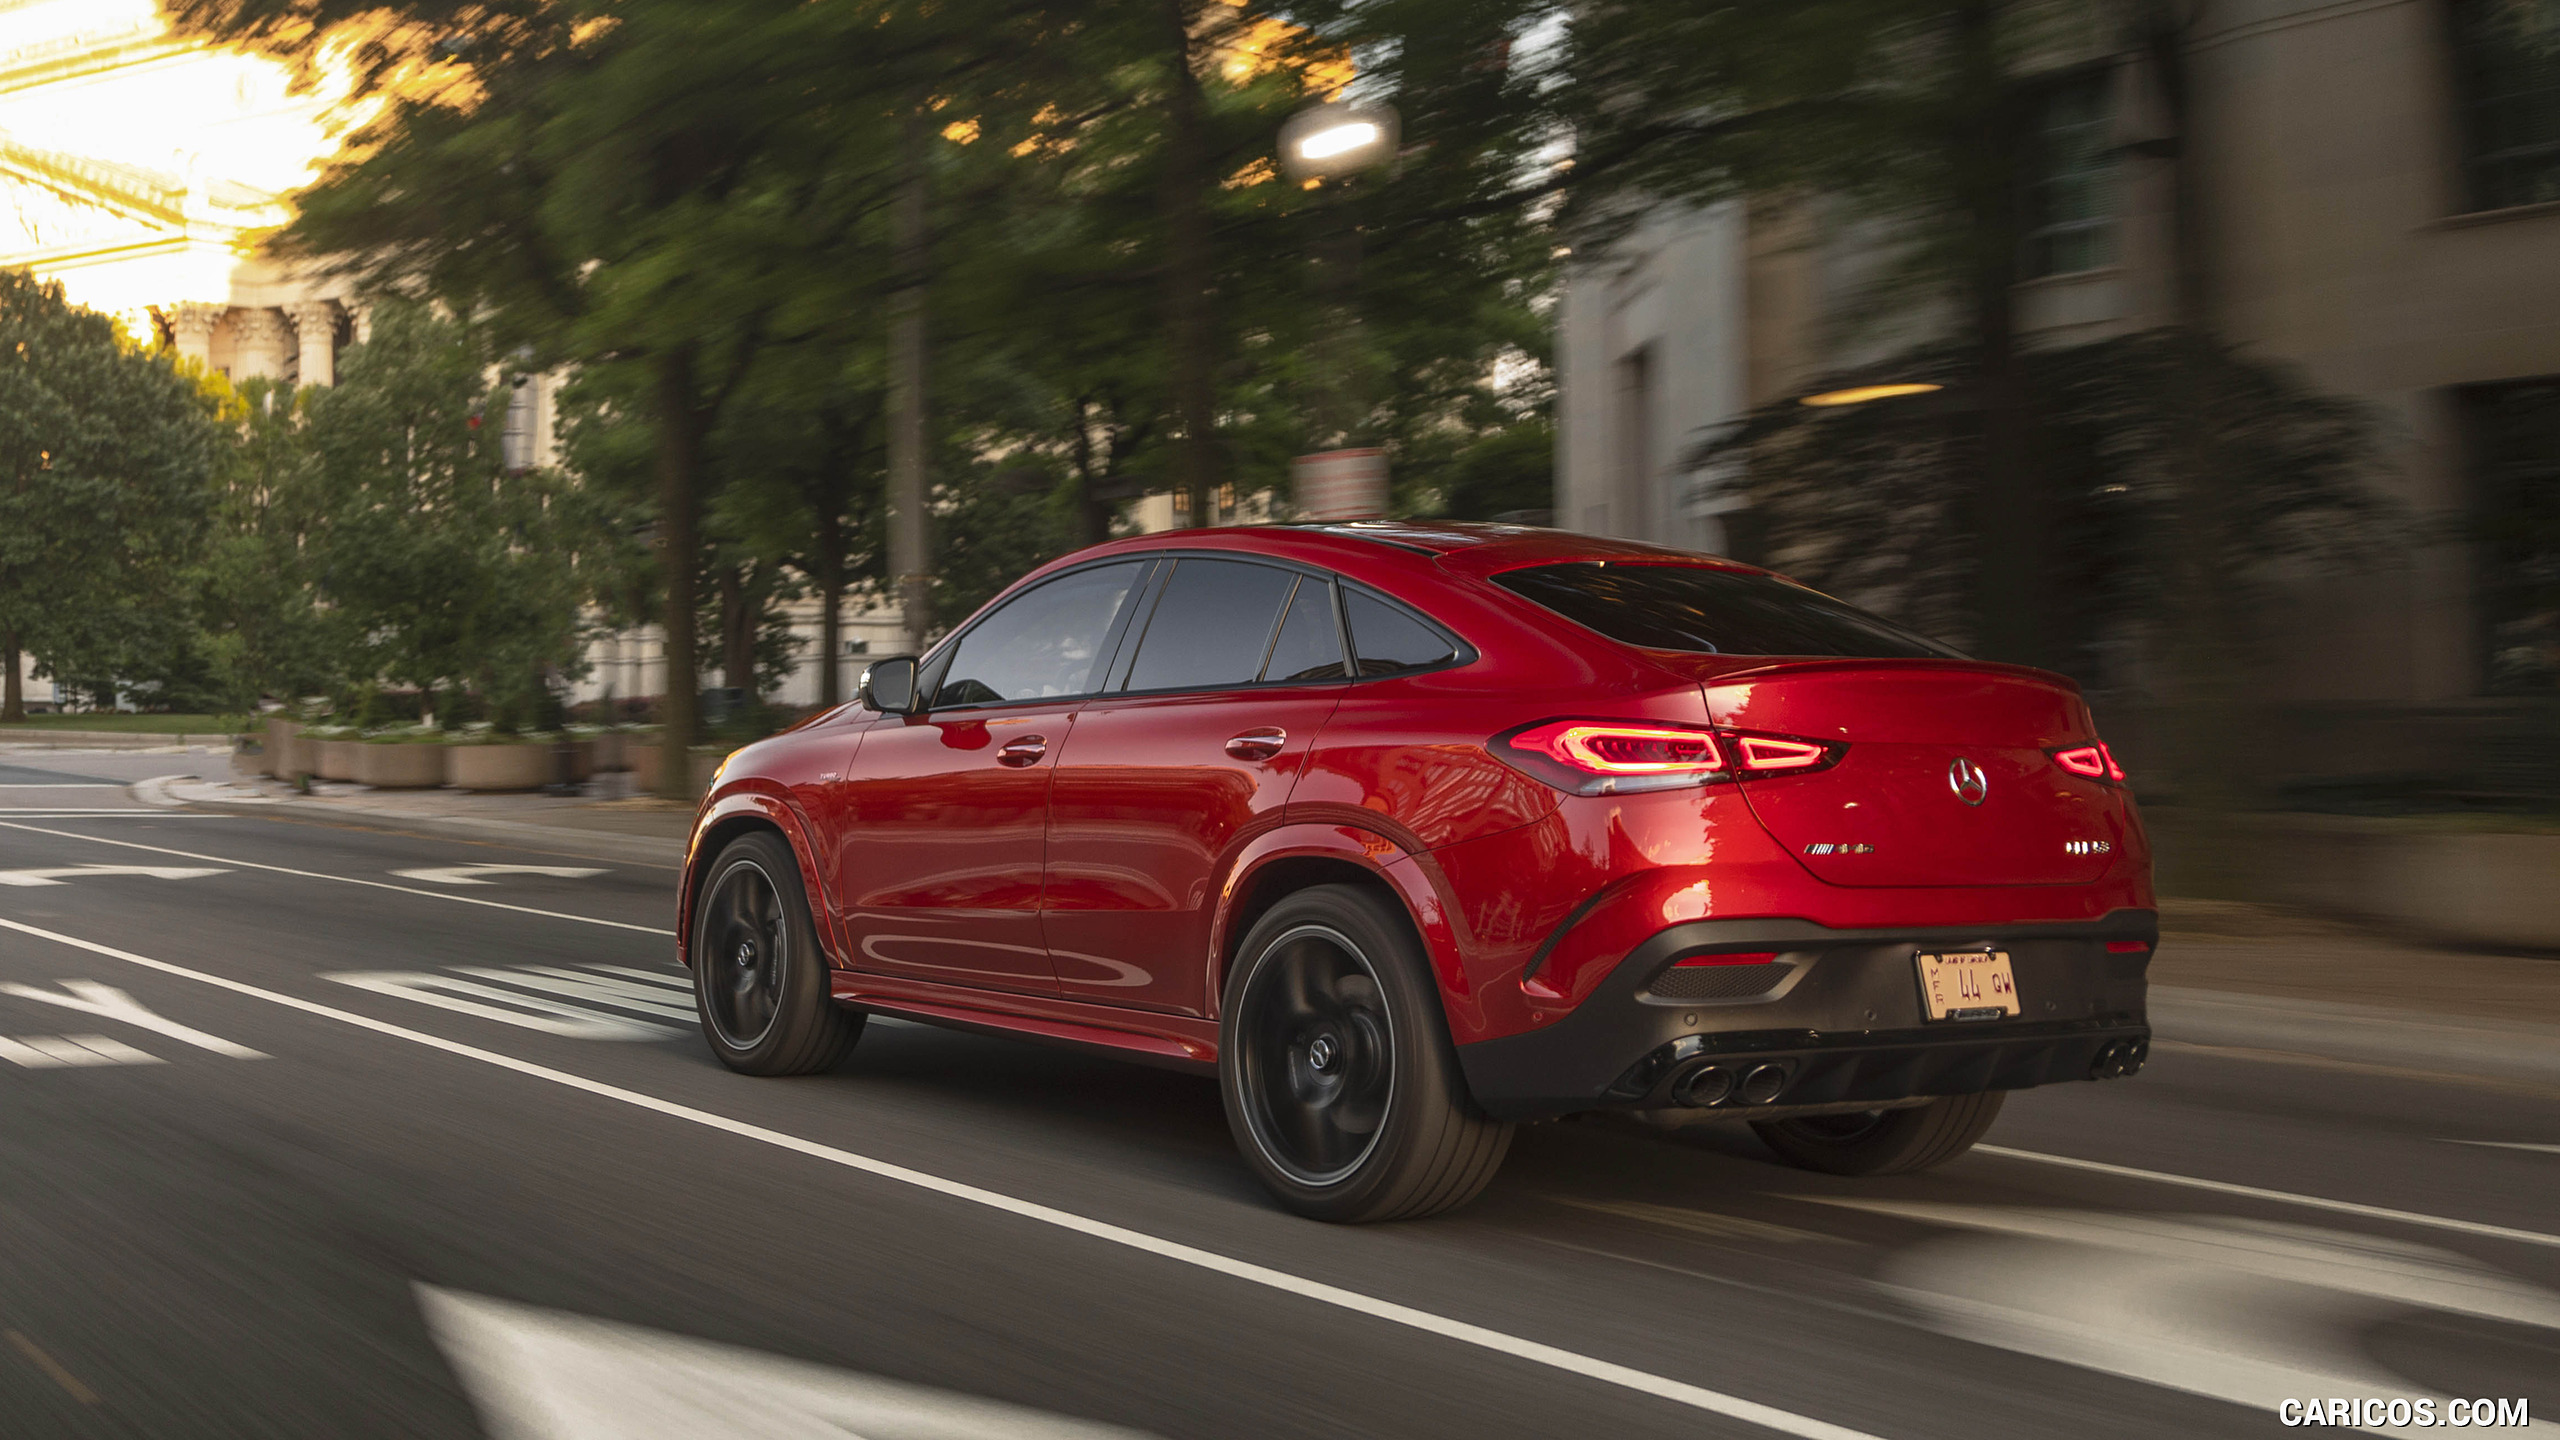 2021 Mercedes-AMG GLE 53 Coupe - Rear Three-Quarter, #116 of 178